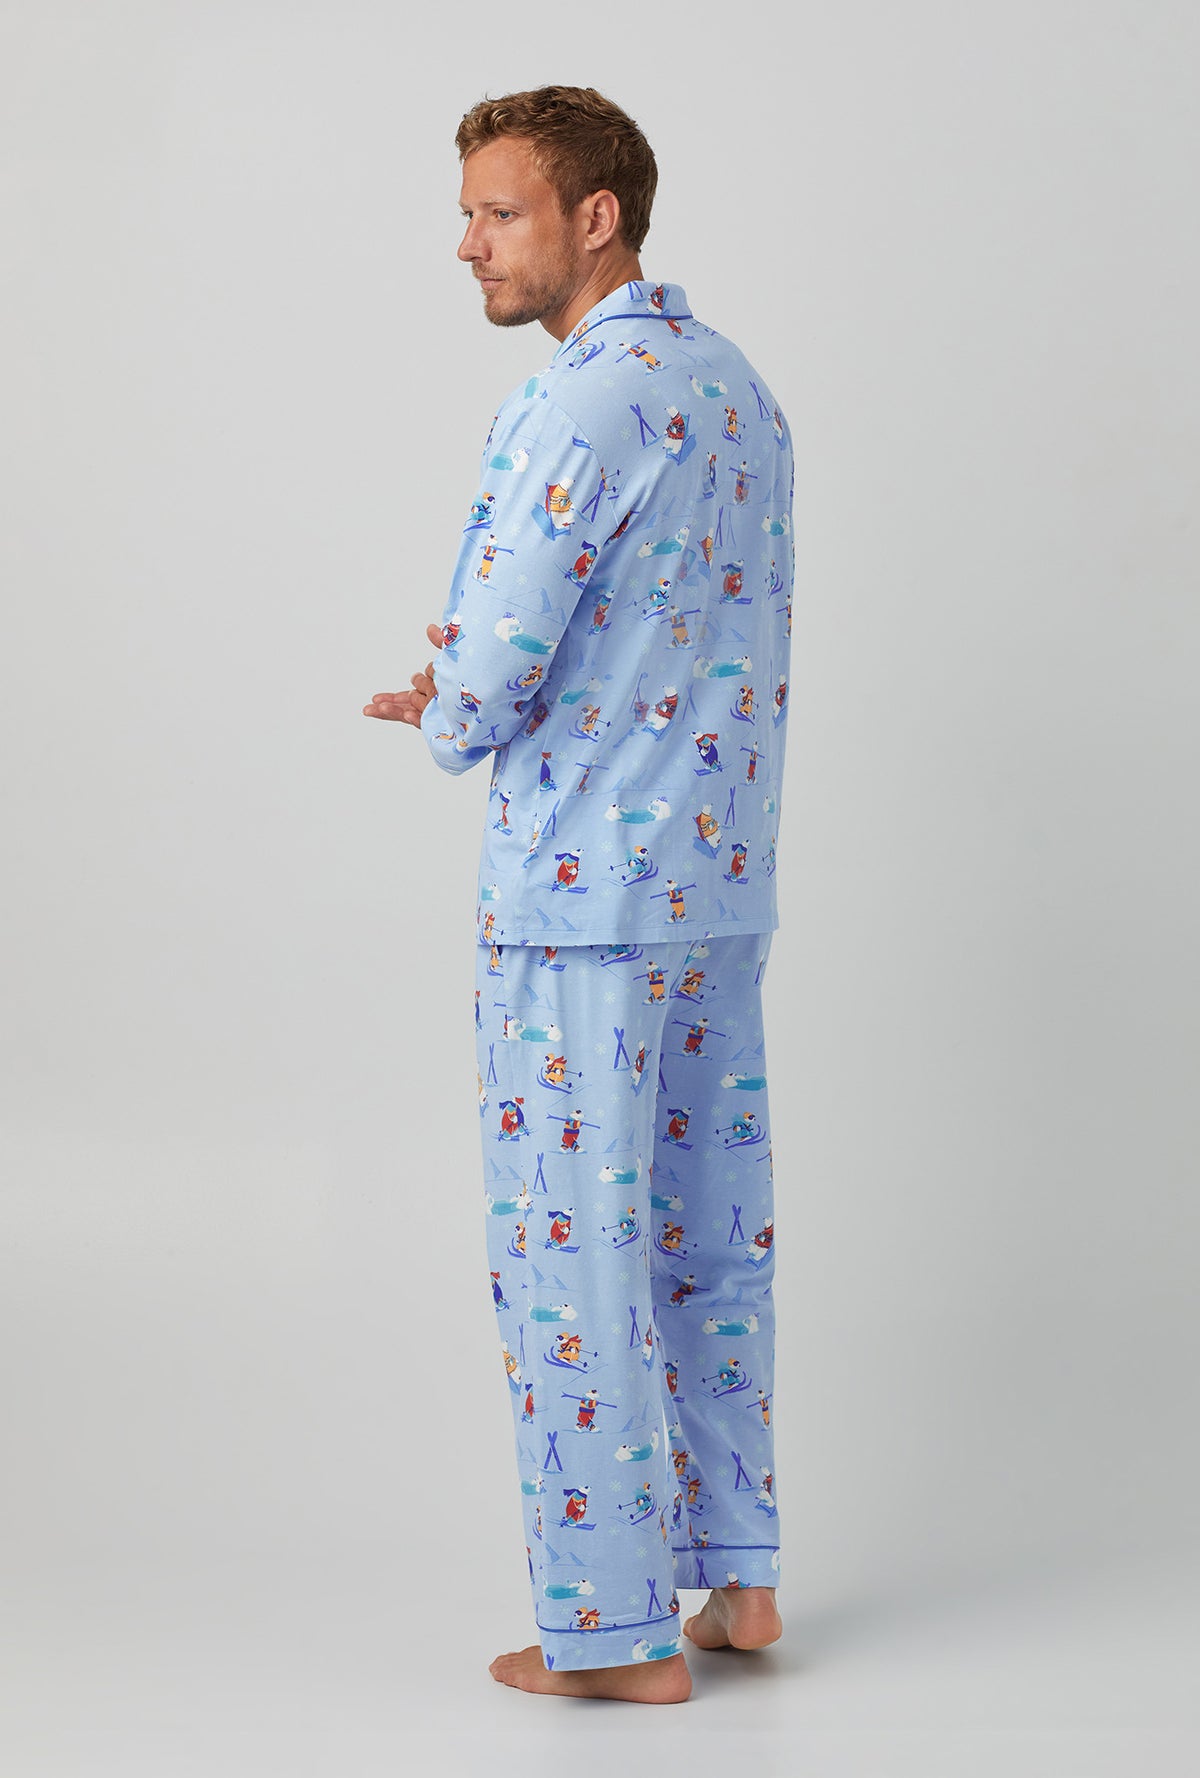 A man wearing light blue  Long Sleeve Classic Stretch Jersey PJ Set with Backcountry Bears print